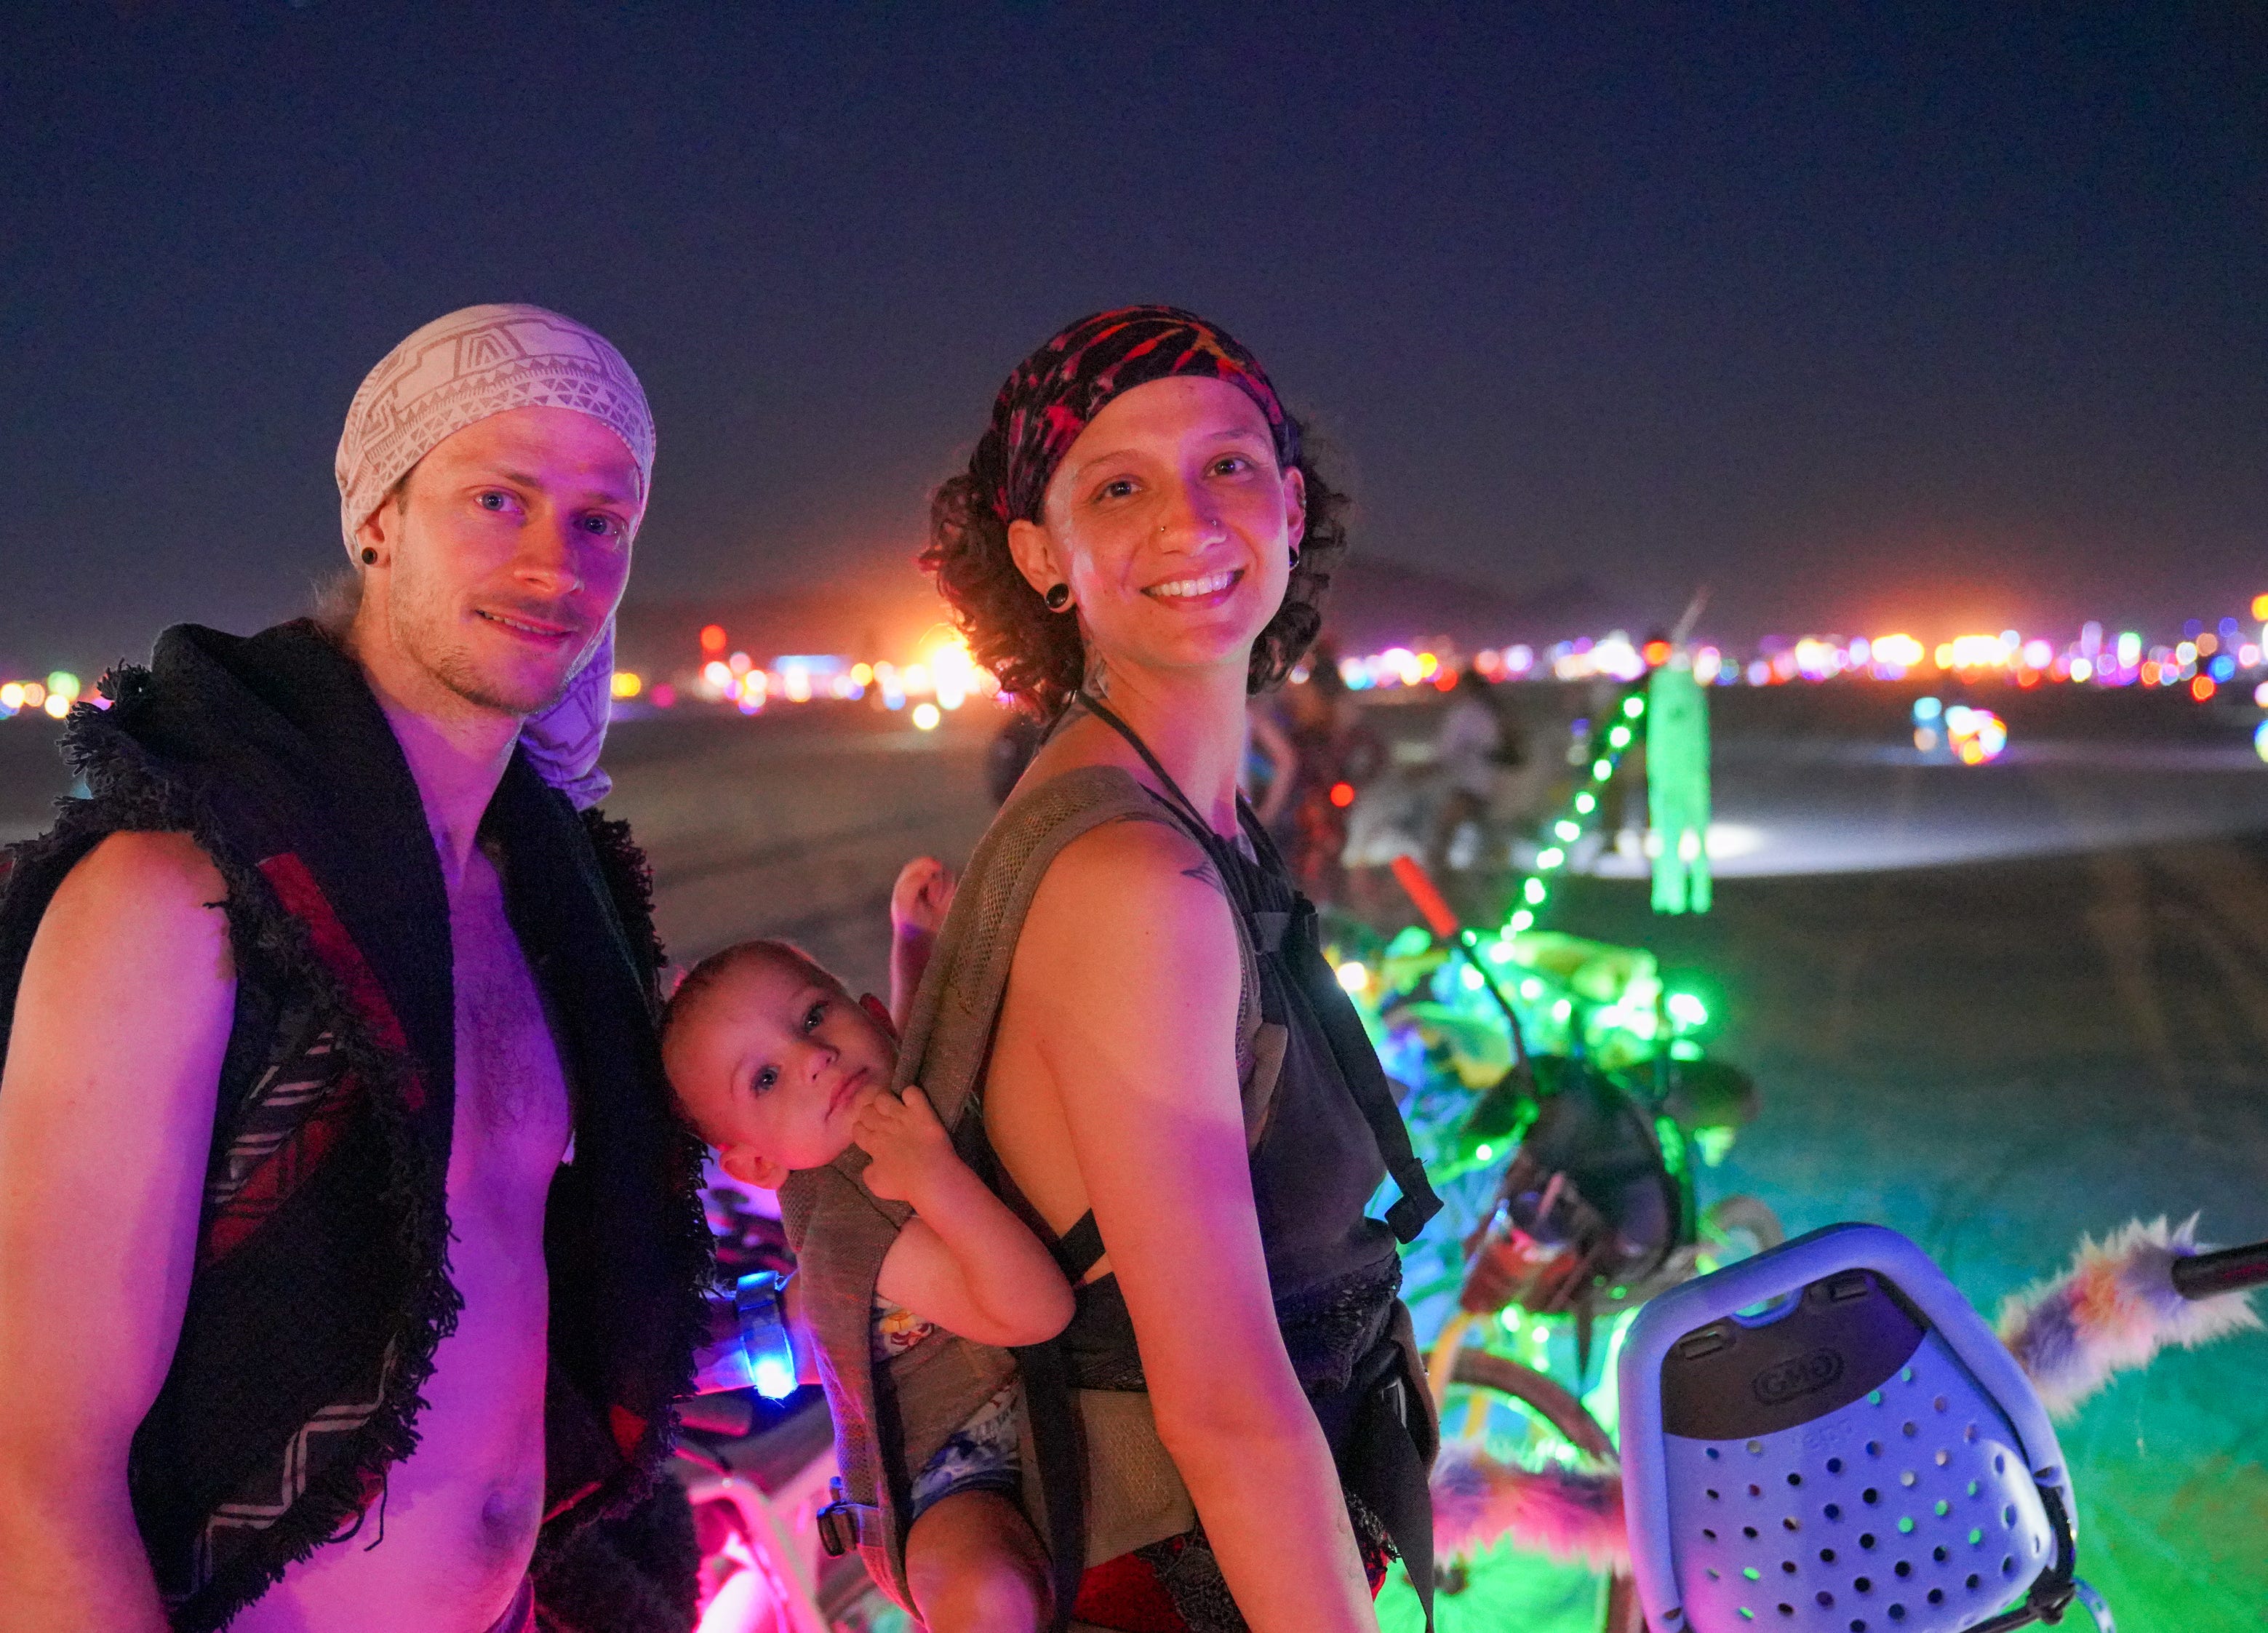 dawn waldrop recommends naked burning man women pic